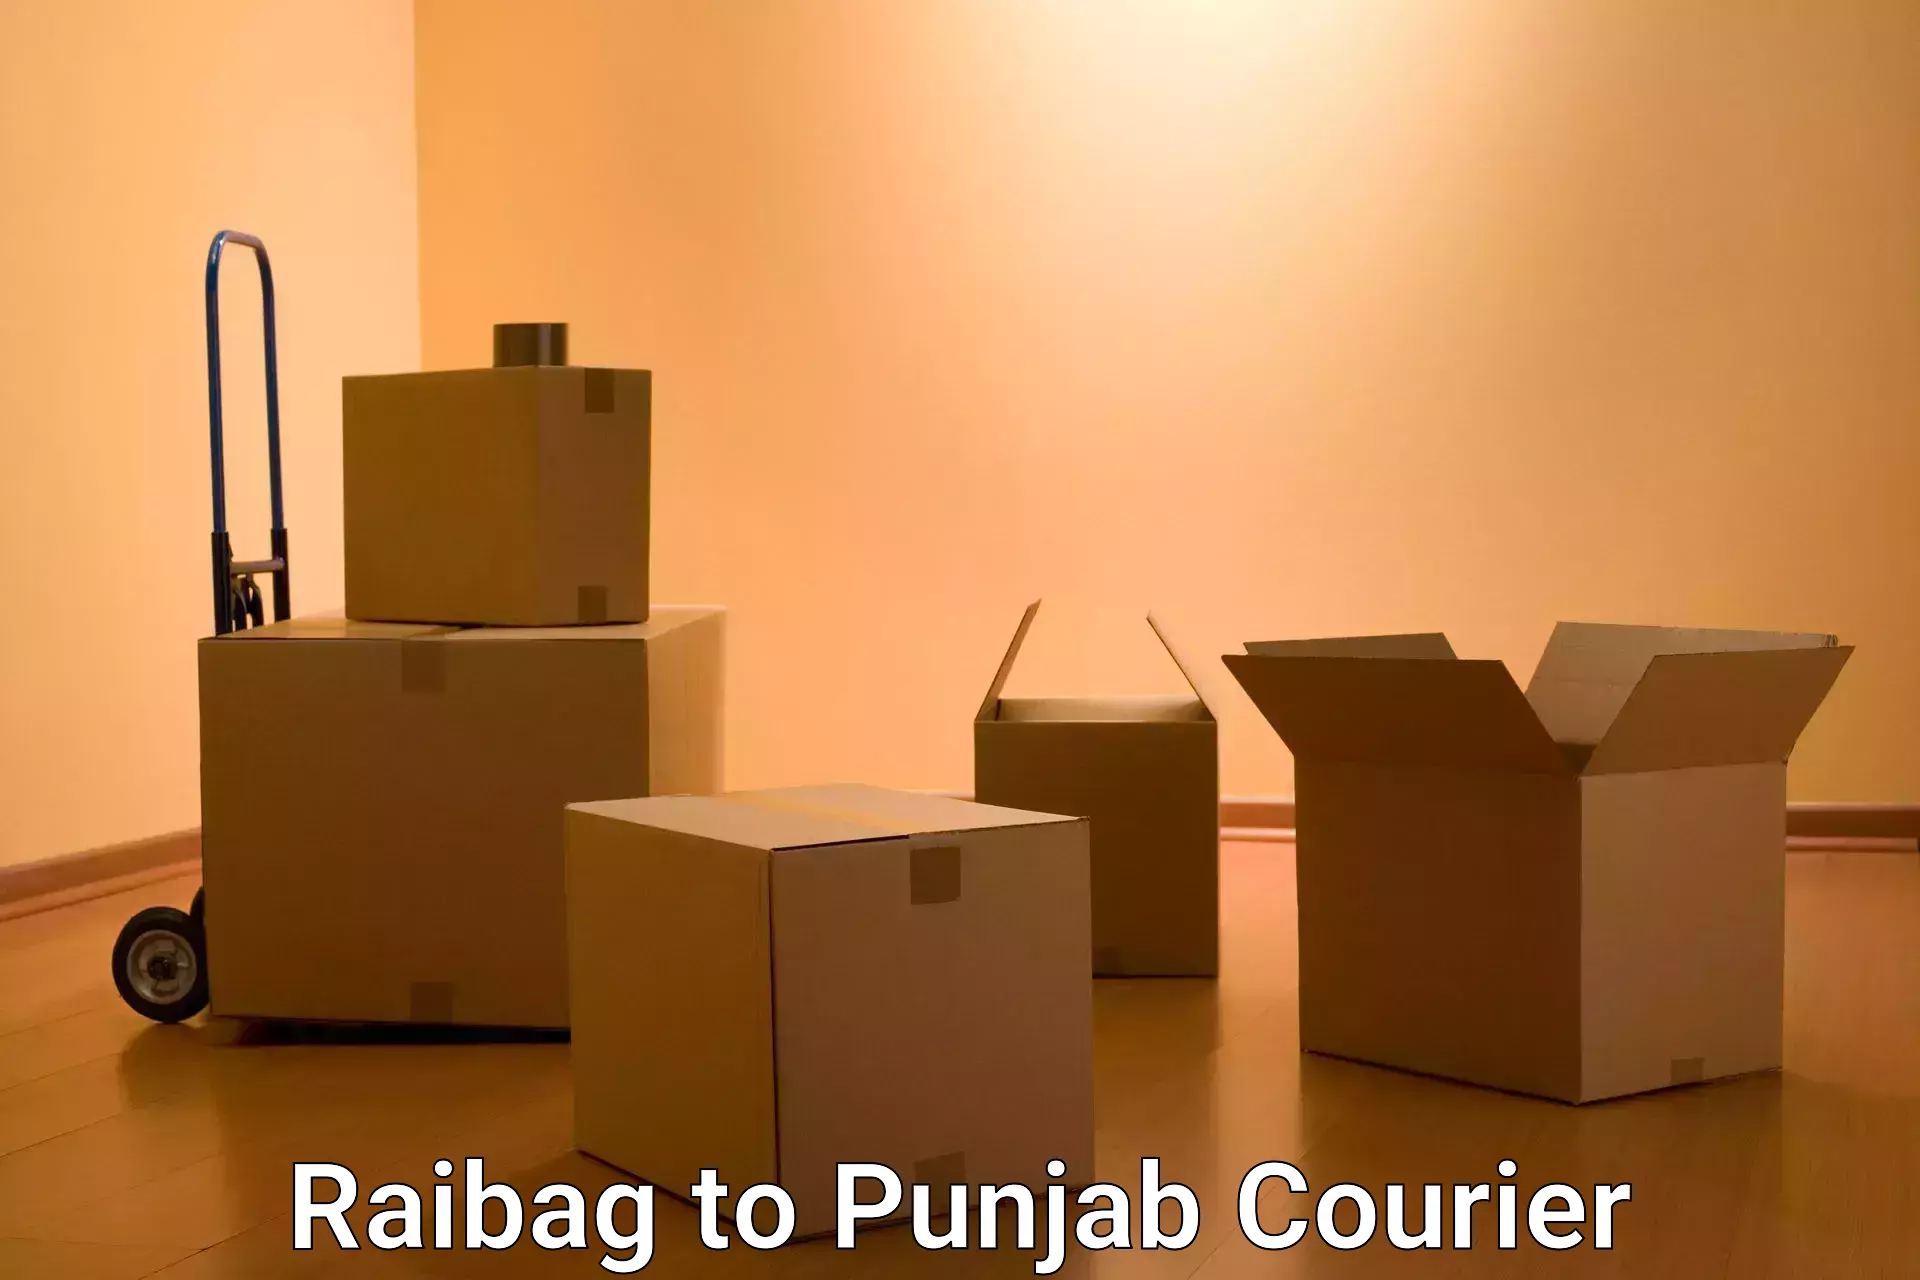 Courier service efficiency Raibag to Sultanpur Lodhi